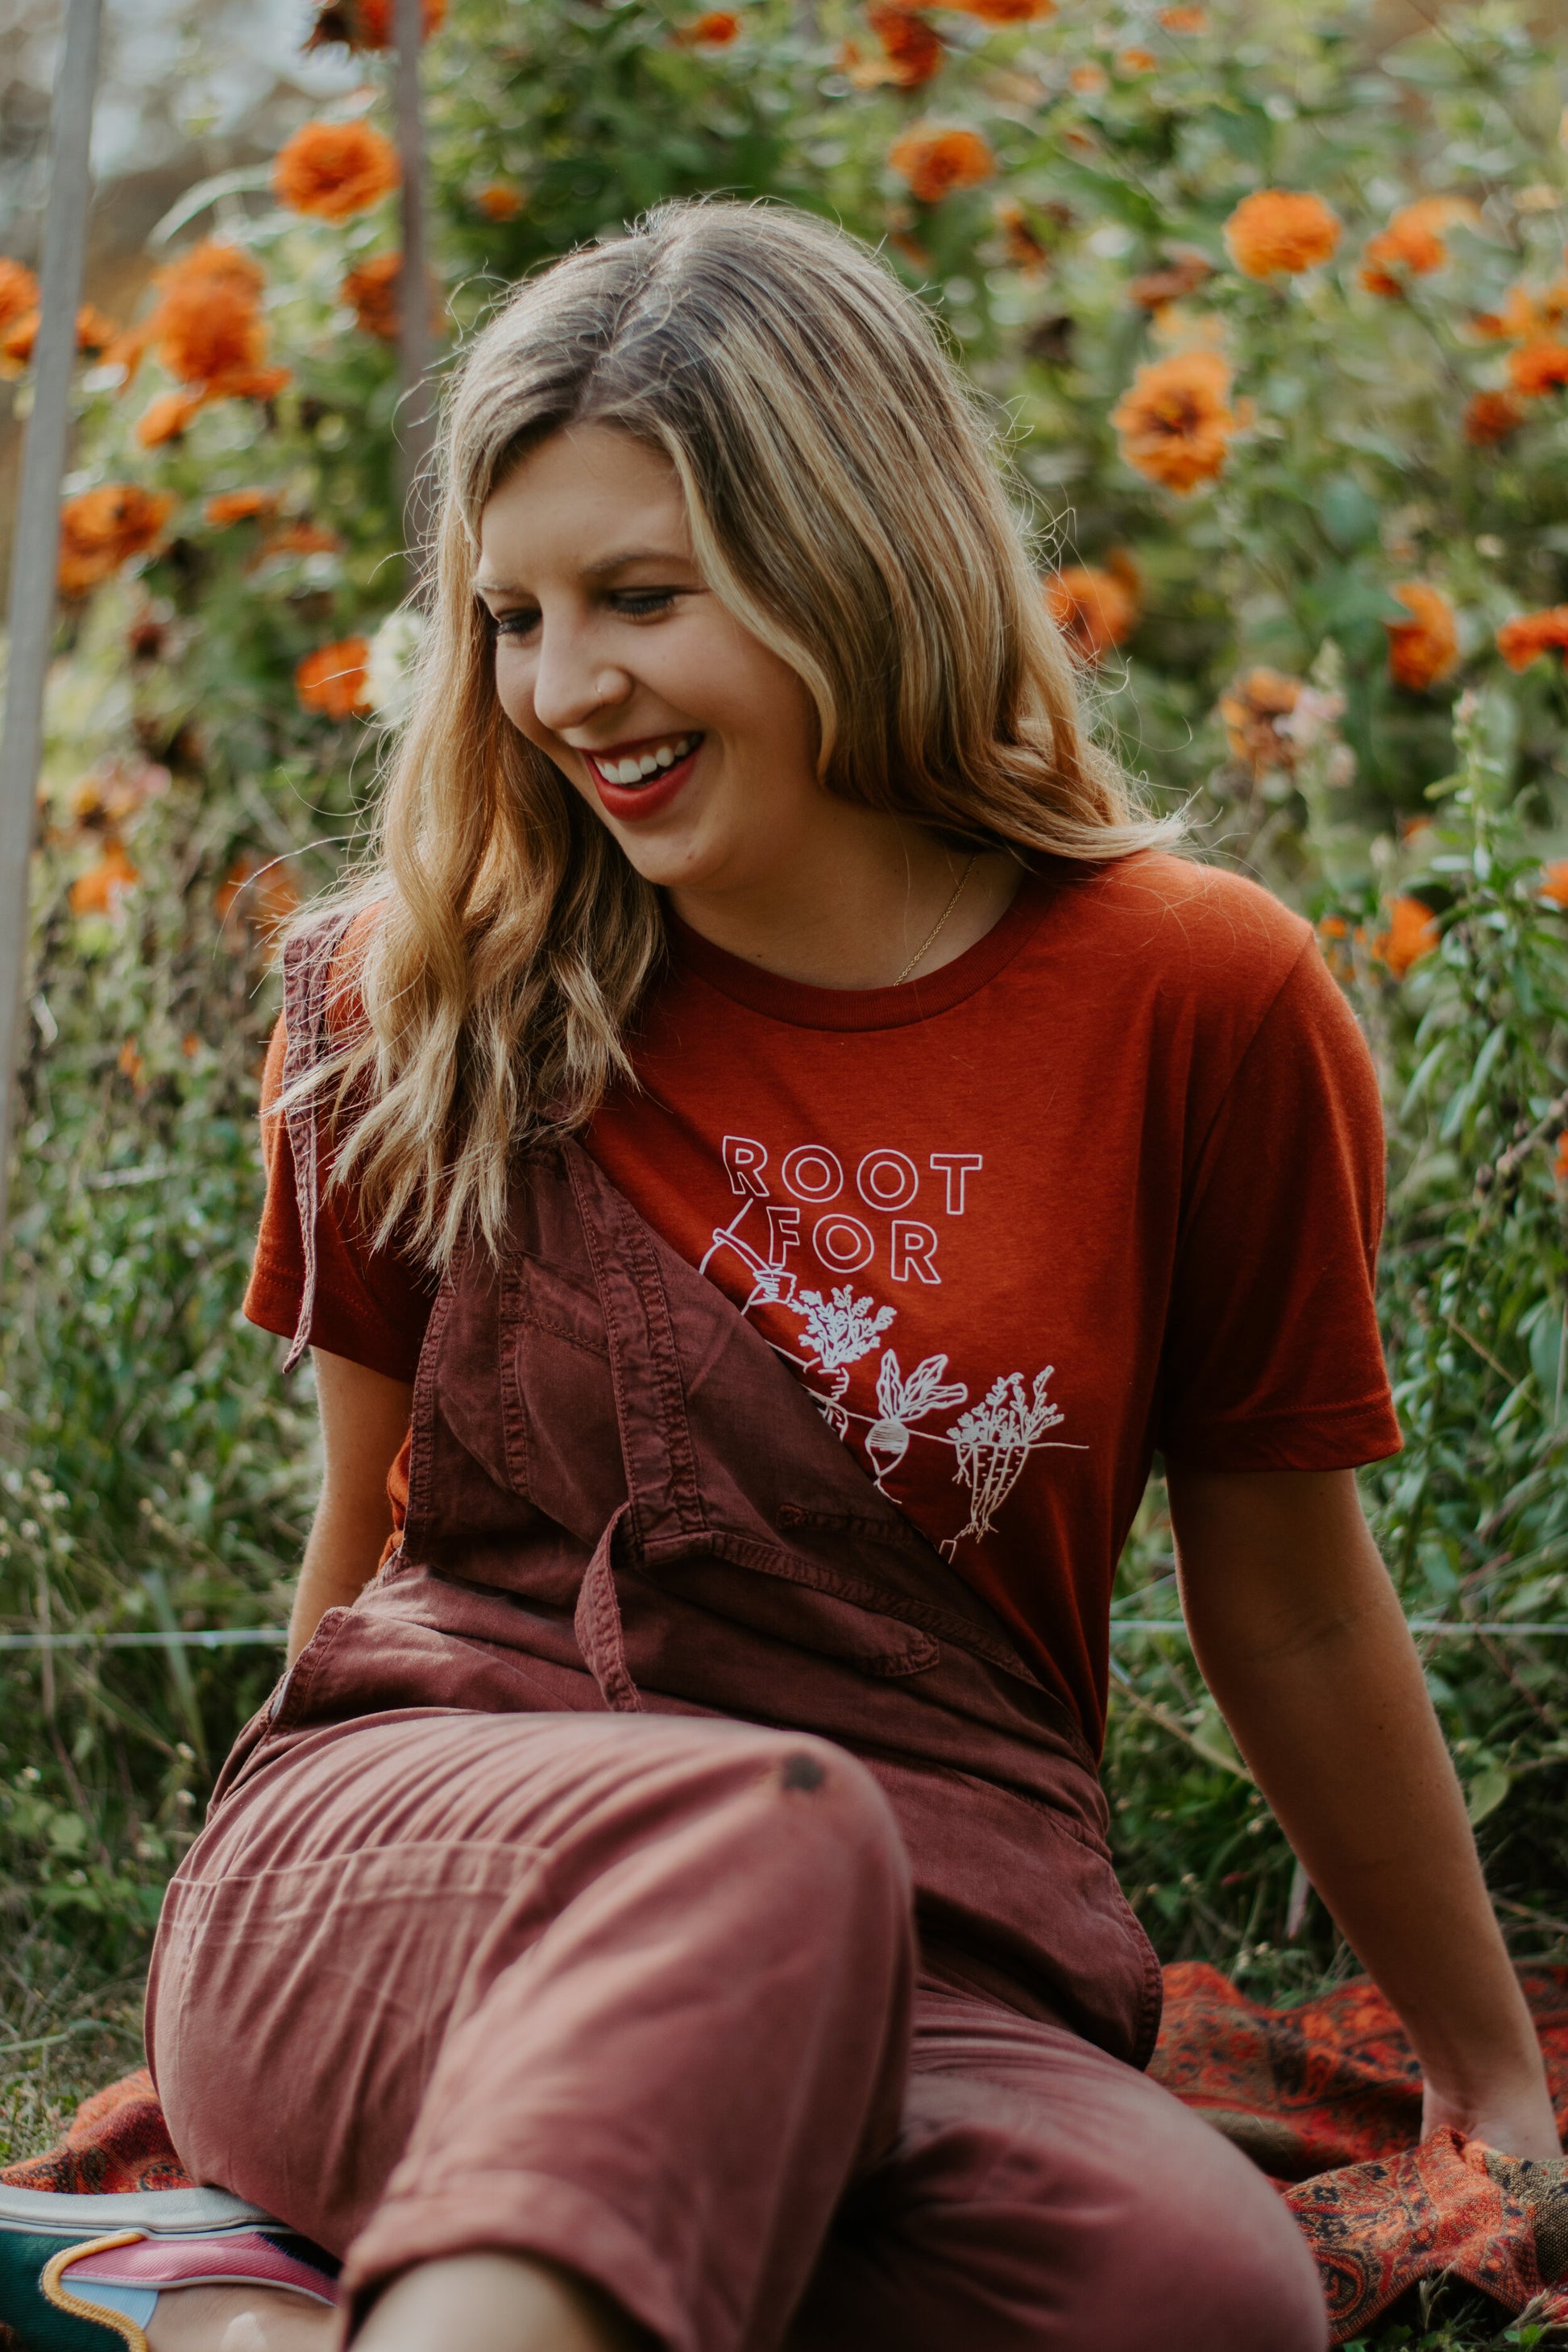 A woman wears a red t-shirt that reads "Root for Women" with brown overalls